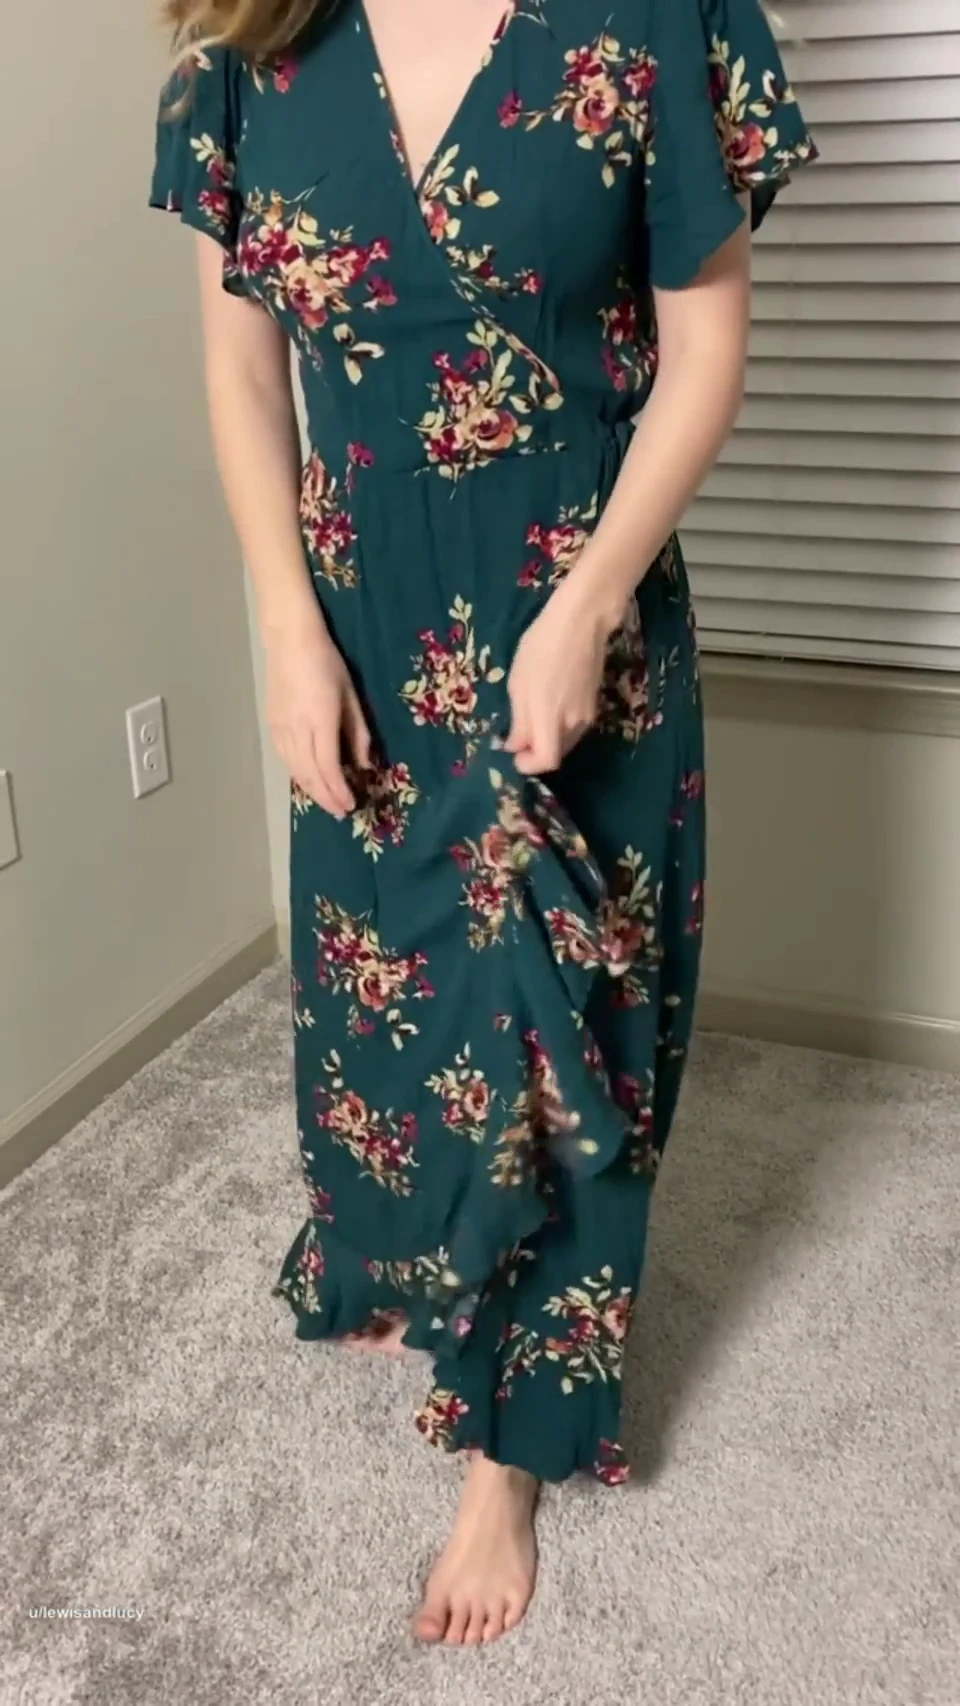 Flowy dresses are the ultimate tease